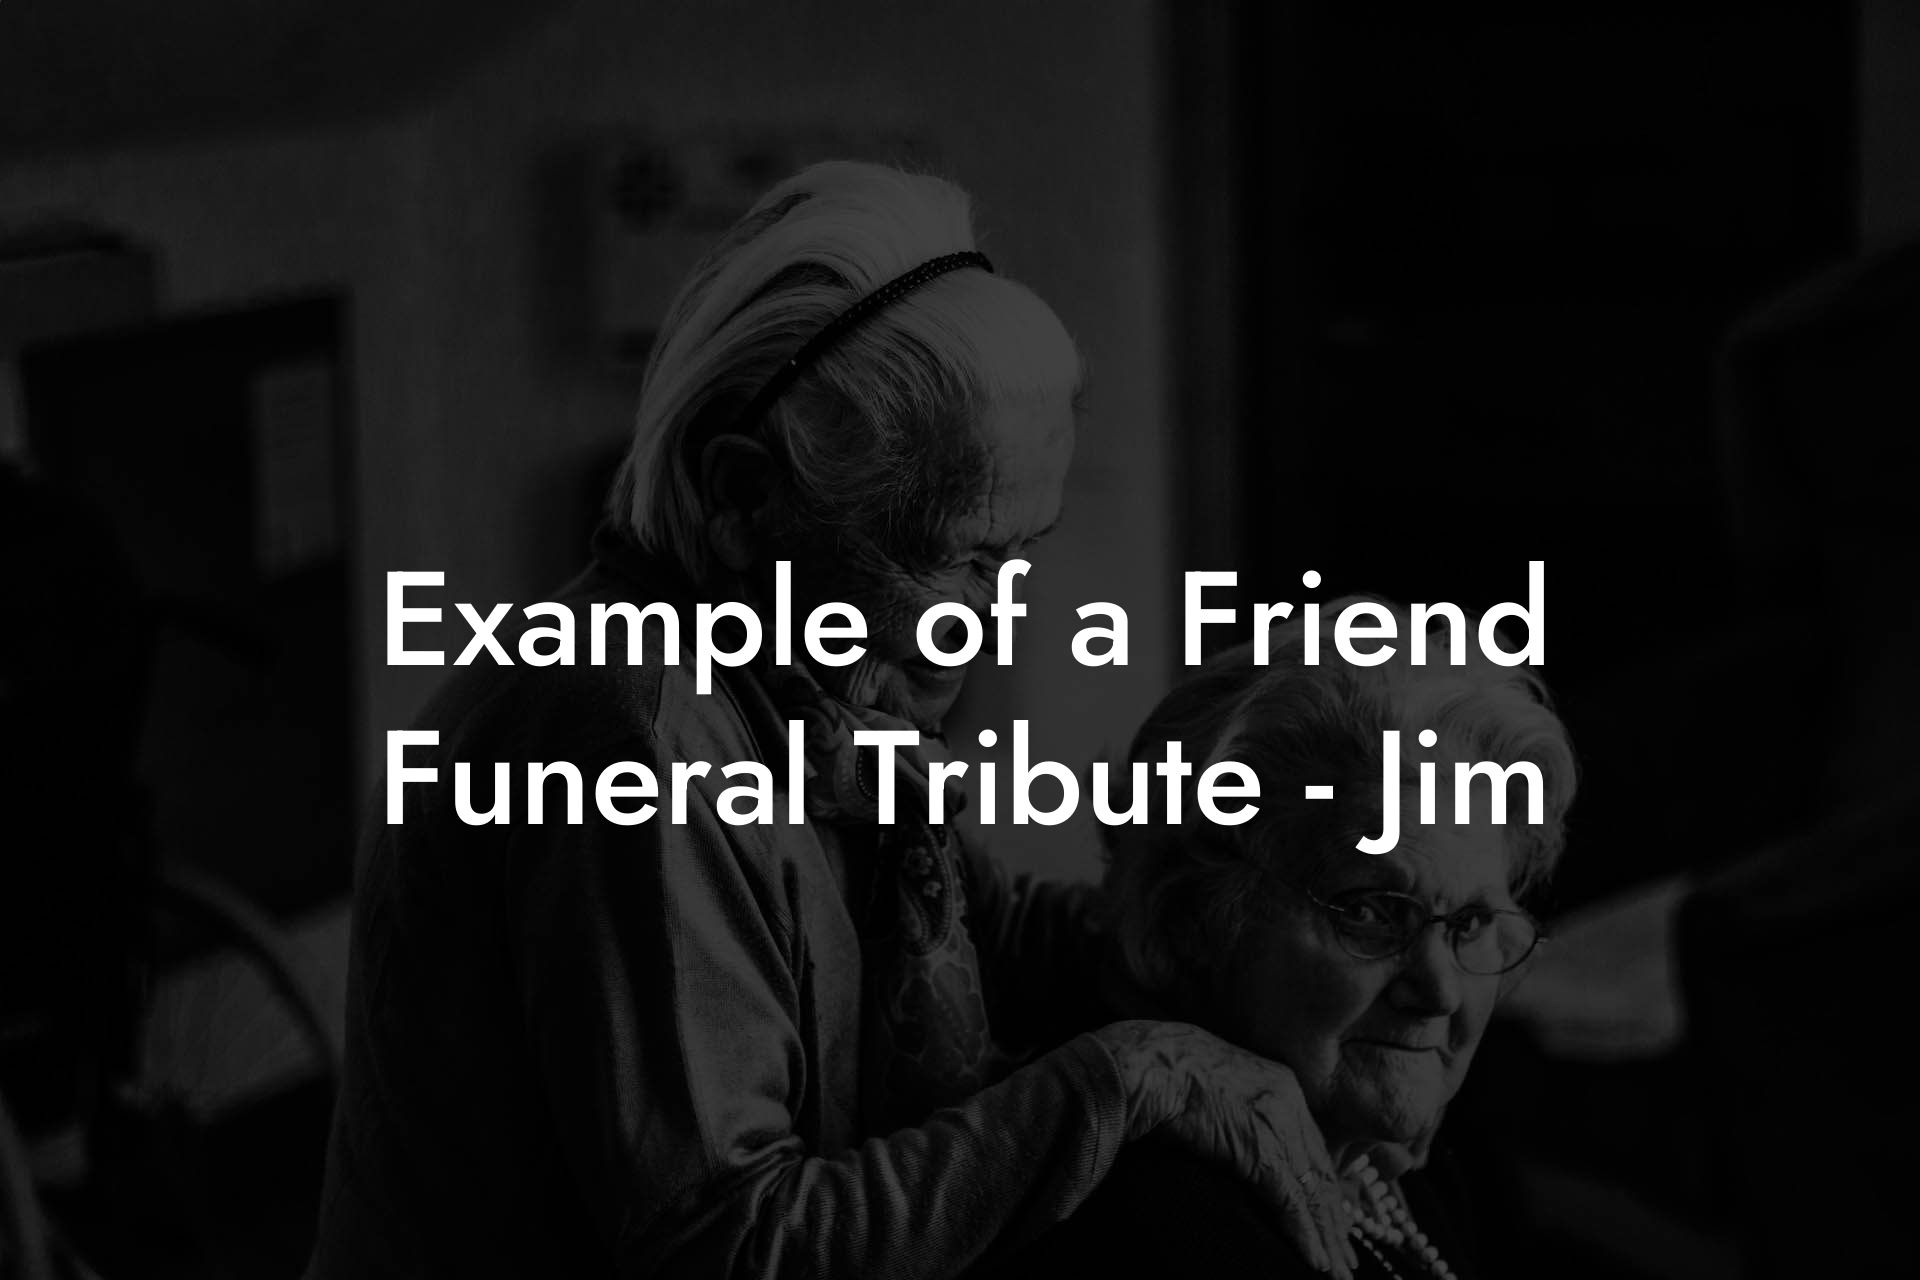 Example of a Friend Funeral Tribute - Jim